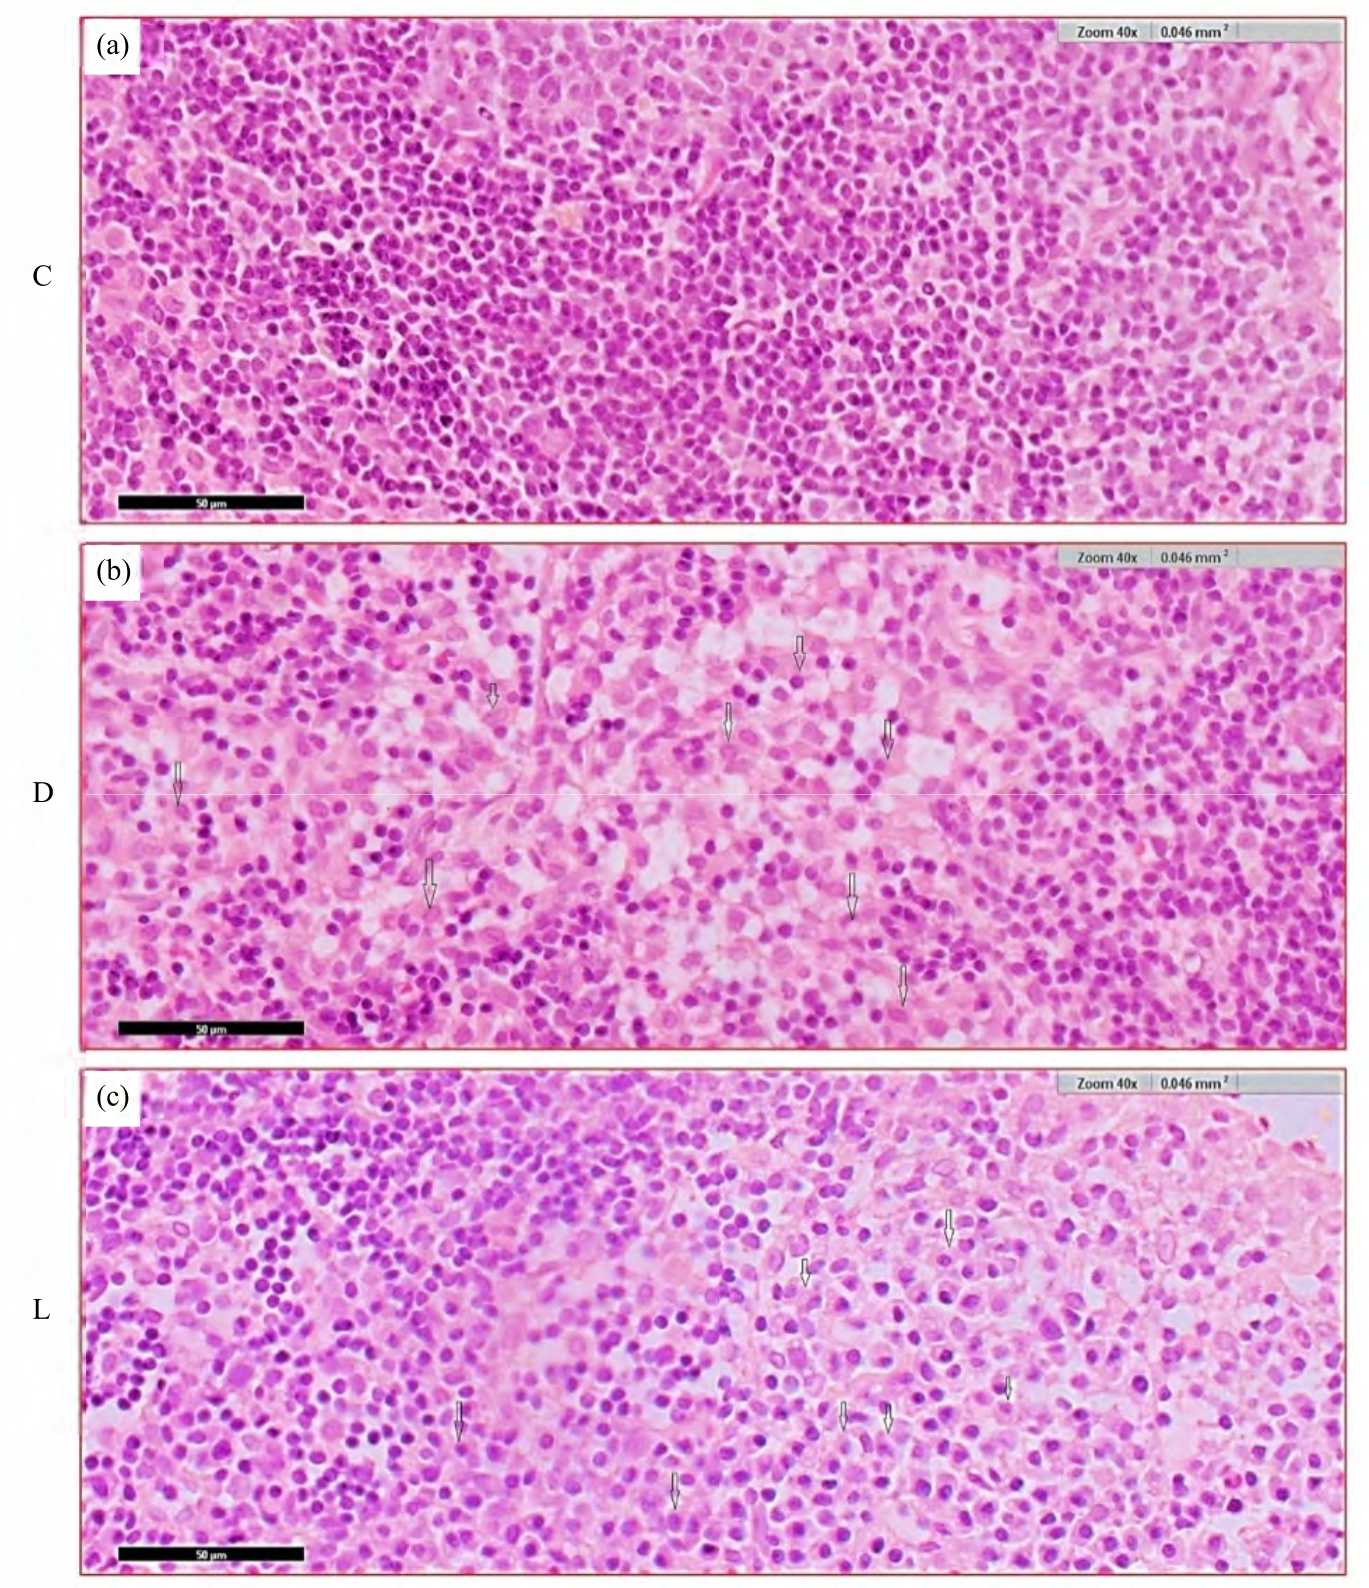 Image for - Levonorgestrel and Desogestrel Modulate Gut Microbiota and Blood Biochemistry of Female Wistar Rats